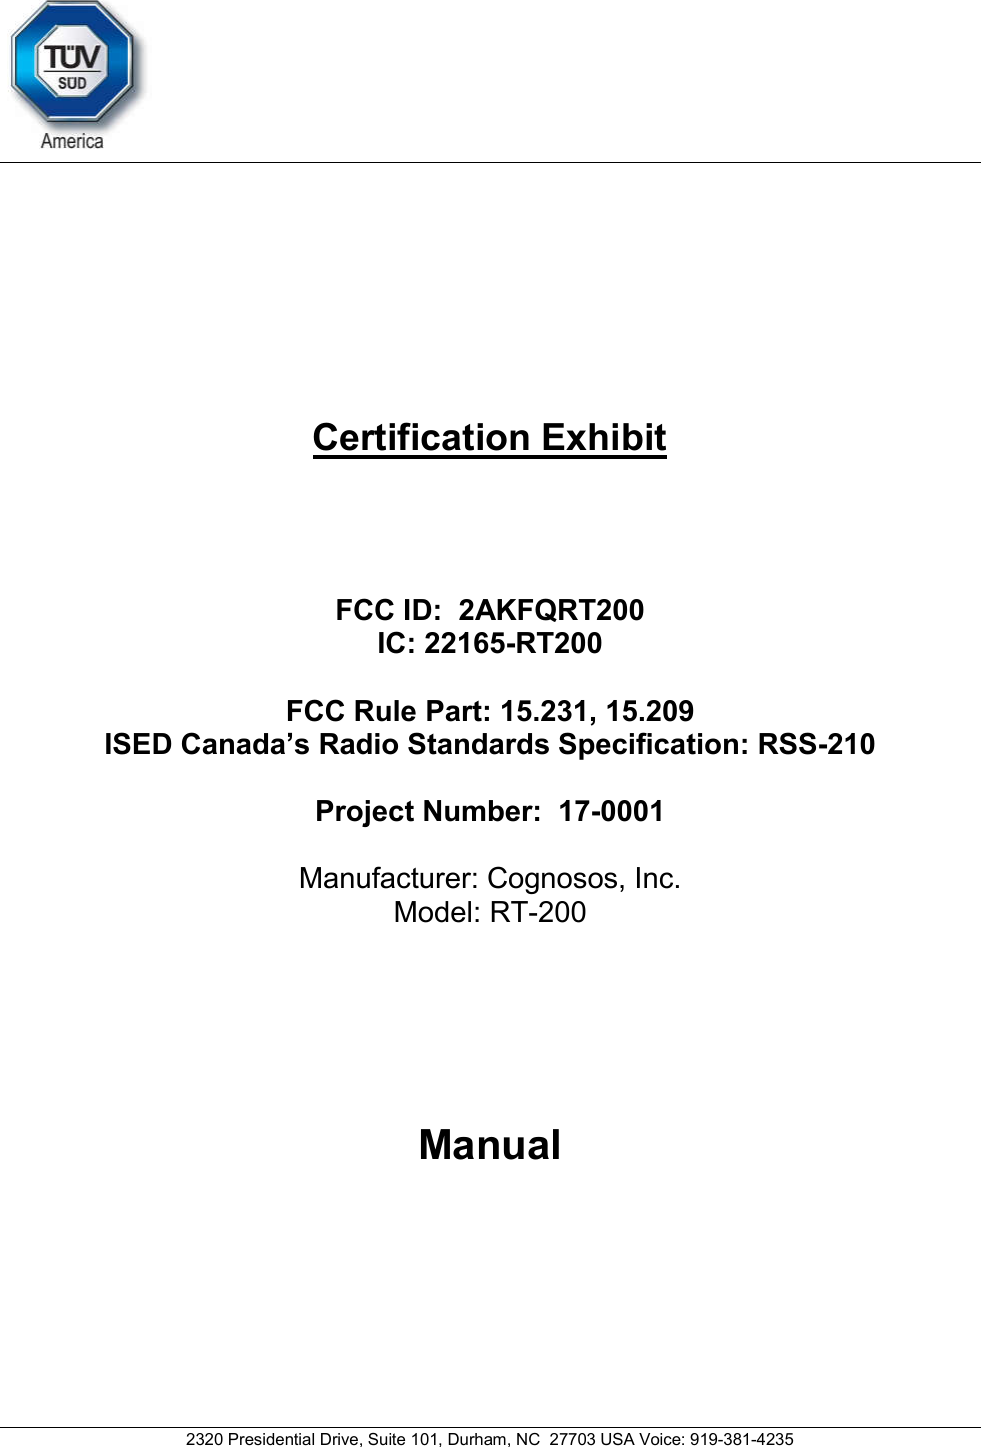     2320 Presidential Drive, Suite 101, Durham, NC  27703 USA Voice: 919-381-4235     Certification Exhibit     FCC ID:  2AKFQRT200 IC: 22165-RT200  FCC Rule Part: 15.231, 15.209 ISED Canada’s Radio Standards Specification: RSS-210  Project Number:  17-0001   Manufacturer: Cognosos, Inc. Model: RT-200     Manual   